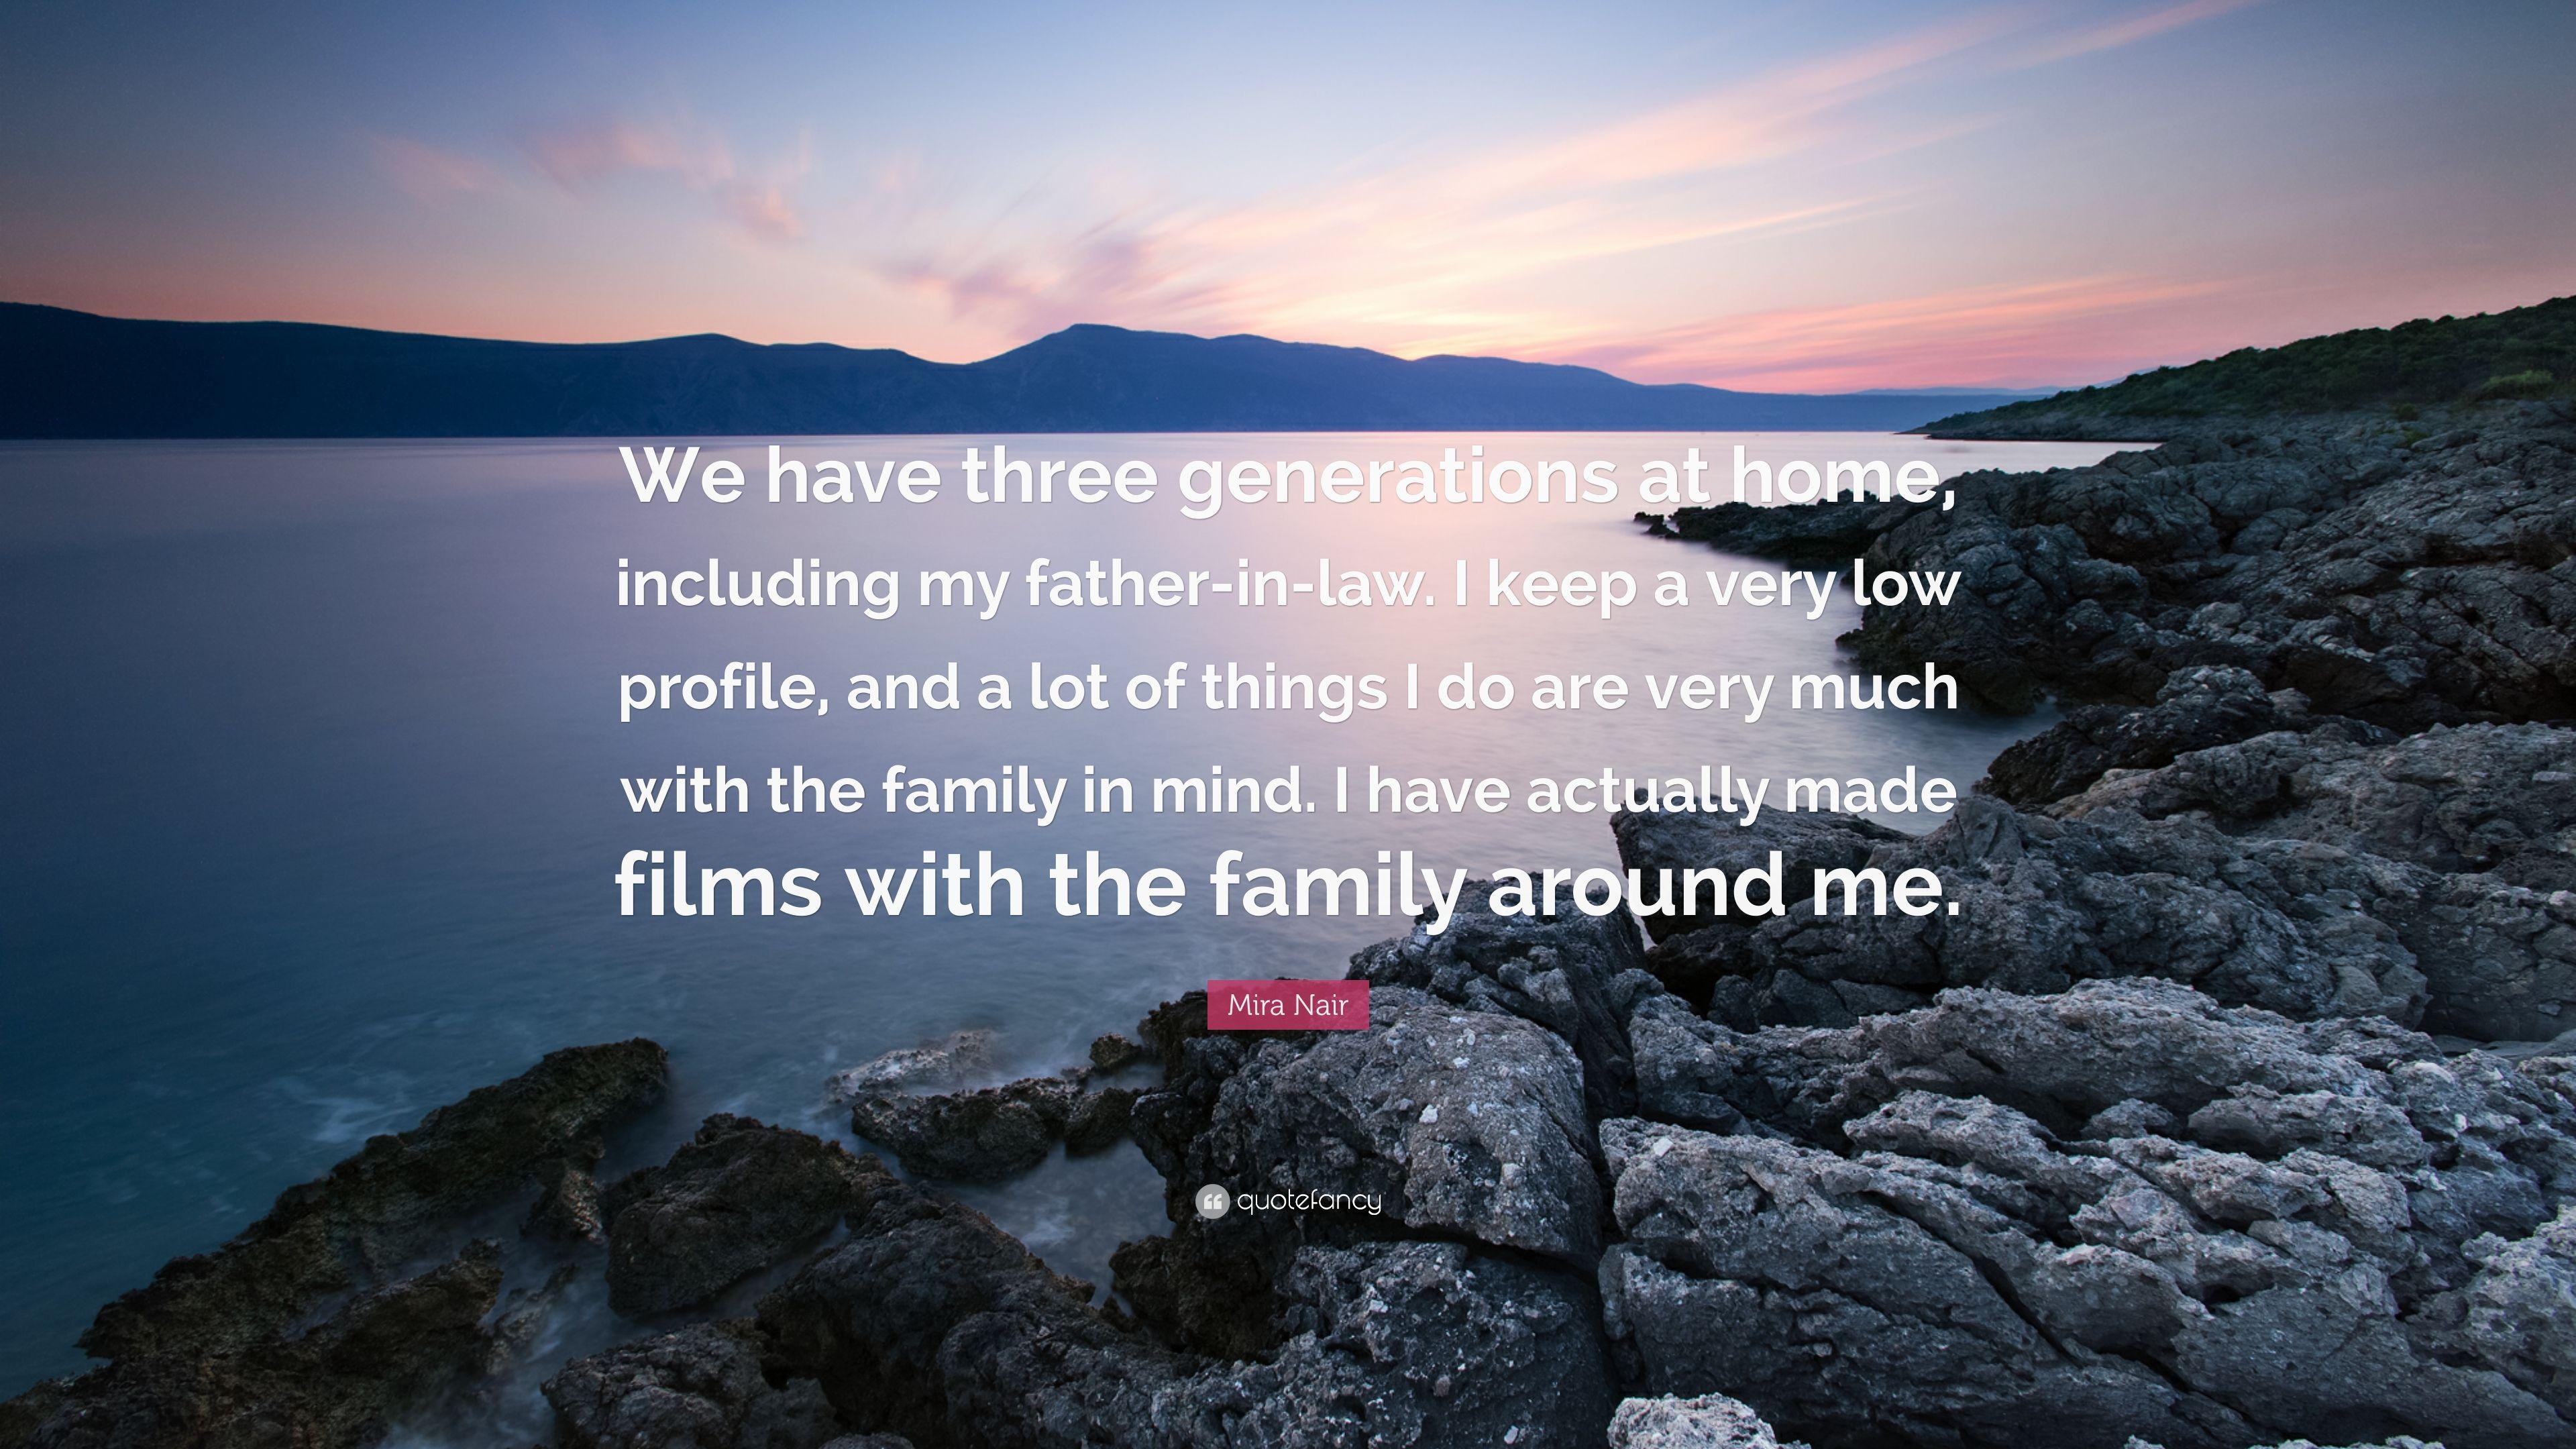 Mira Nair Quote: “We have three generations at home, including my